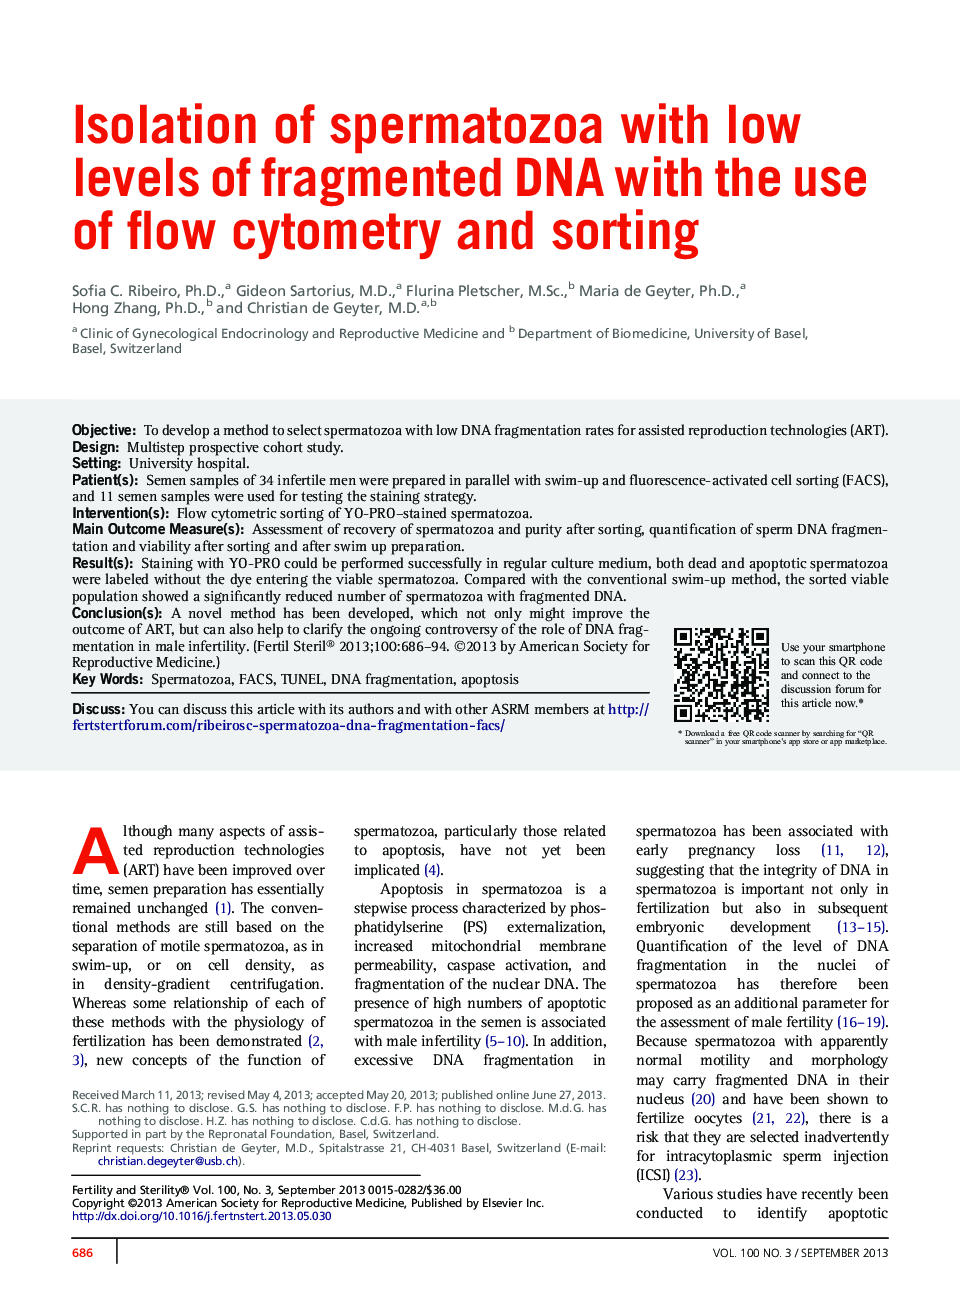 Isolation of spermatozoa with low levels of fragmented DNA with the use of flow cytometry and sorting